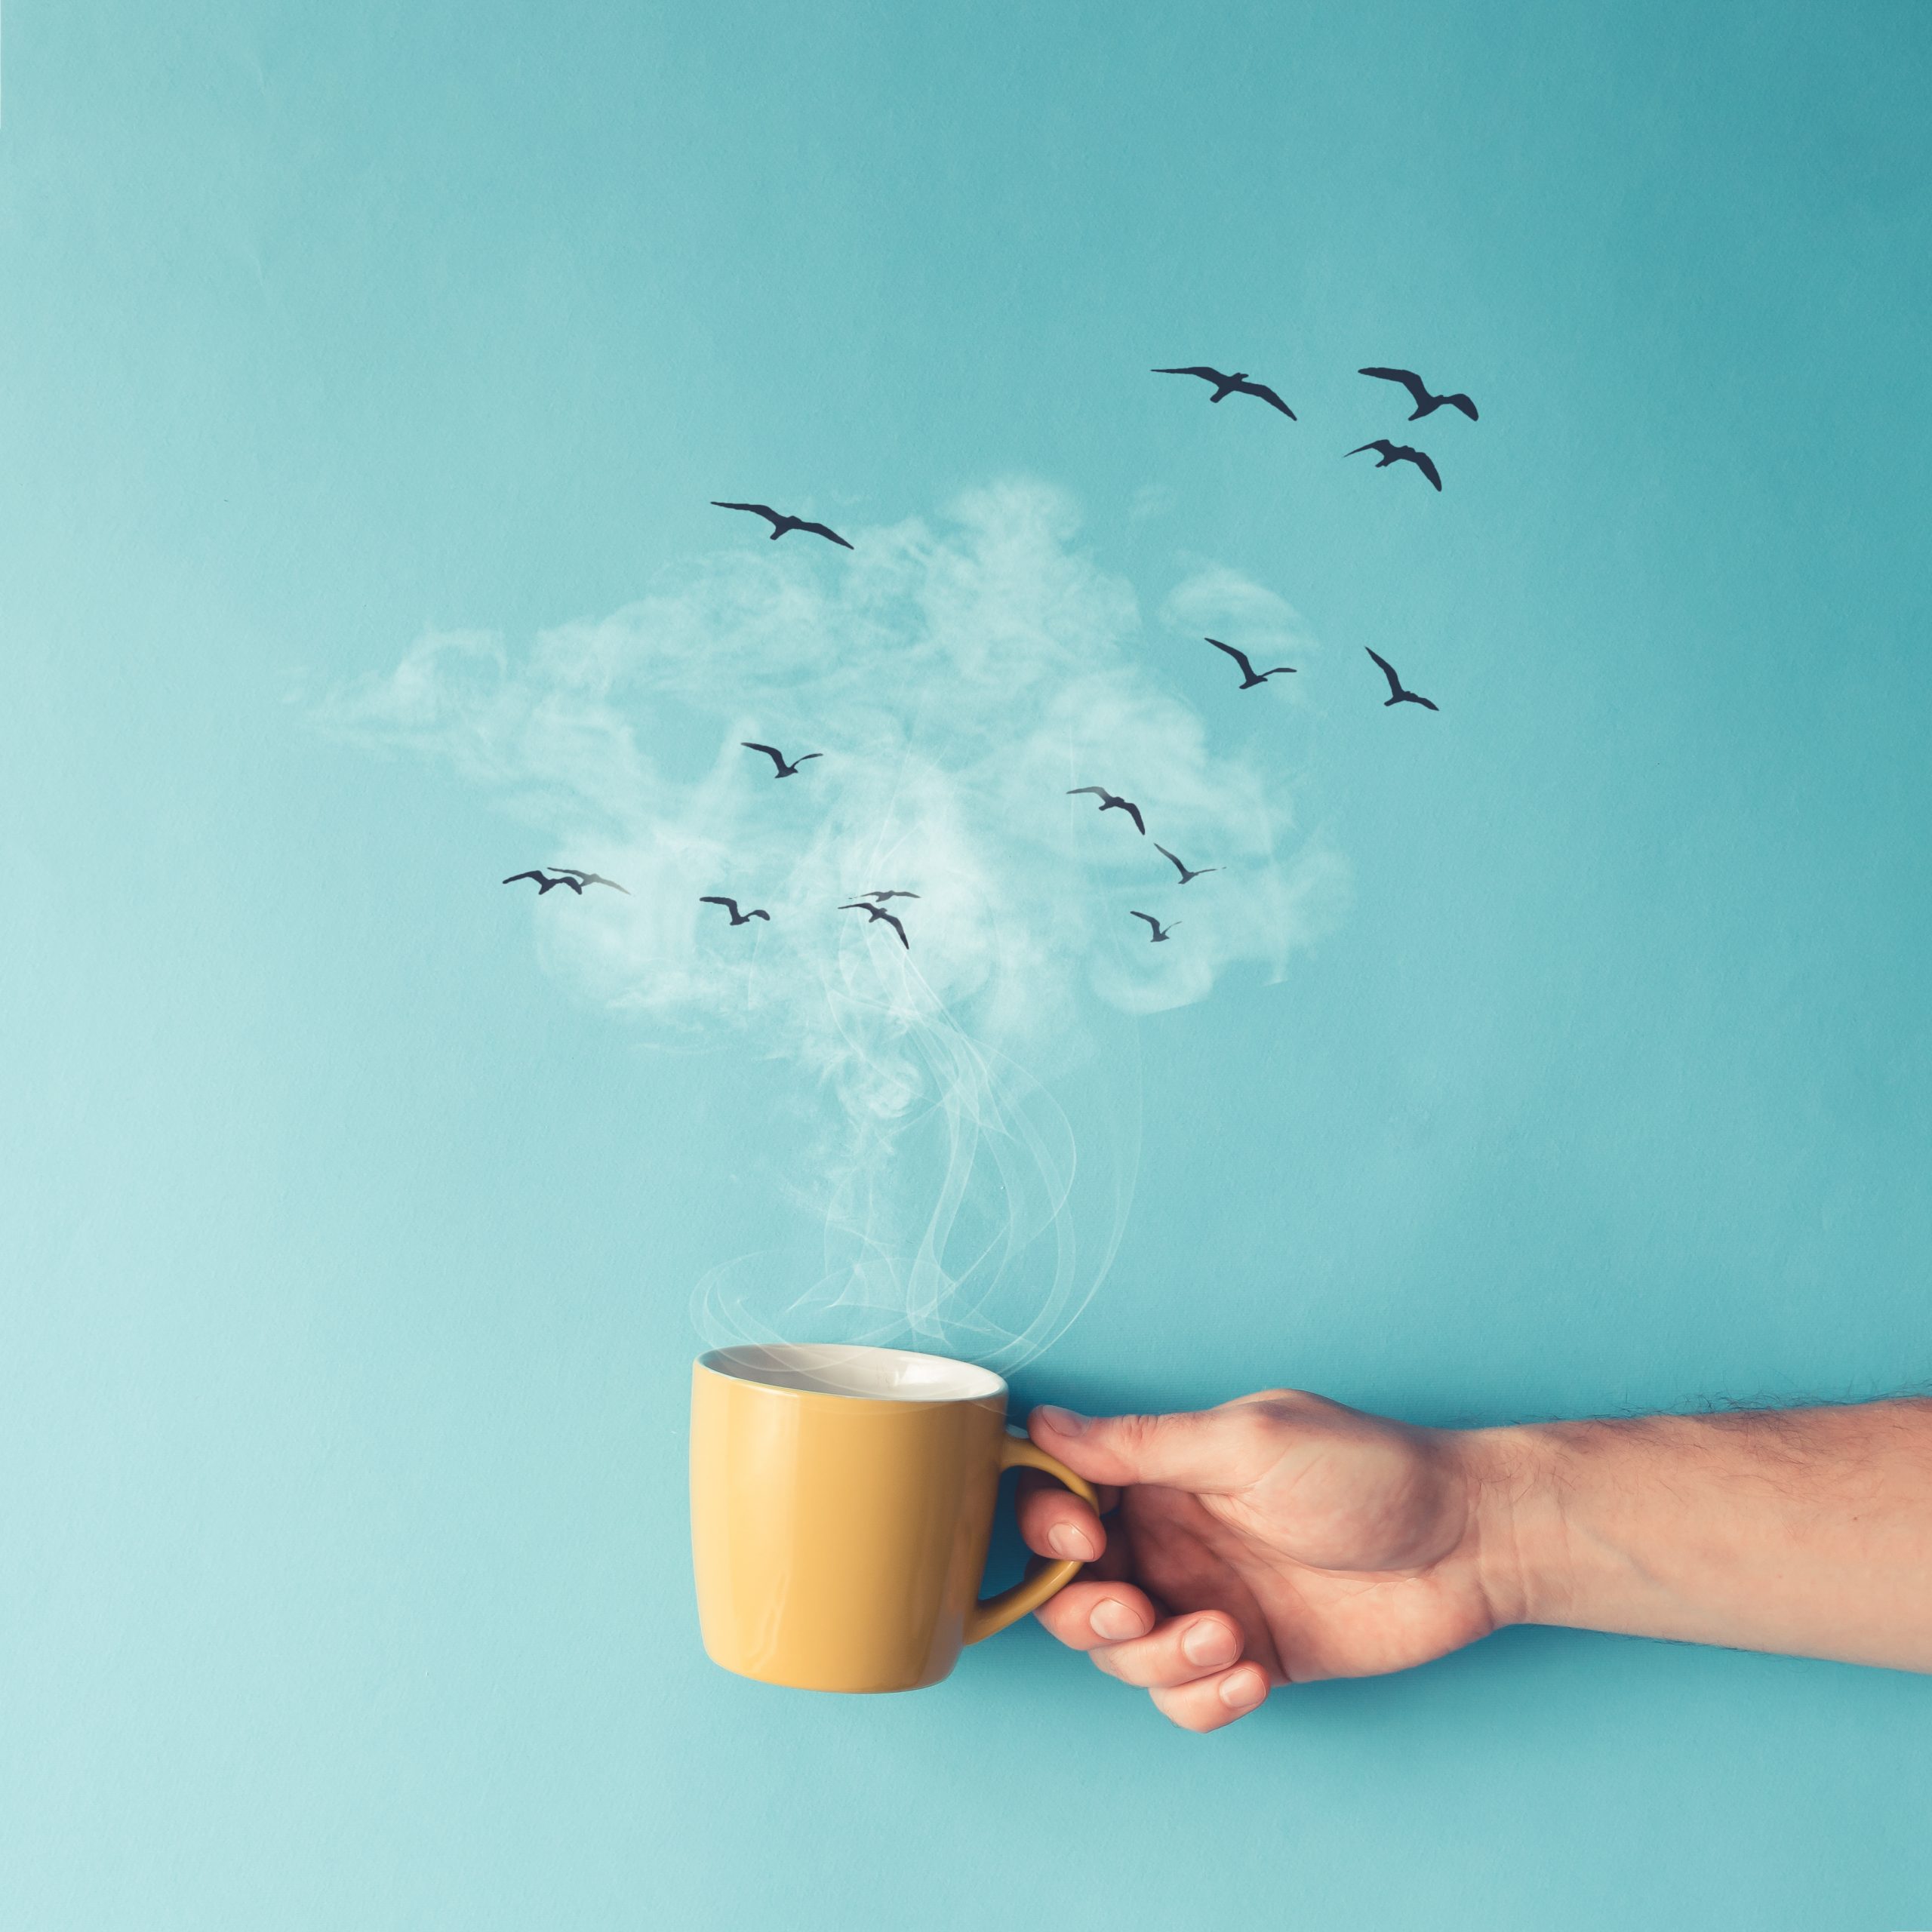 Coffee cup with steam, clouds and birds